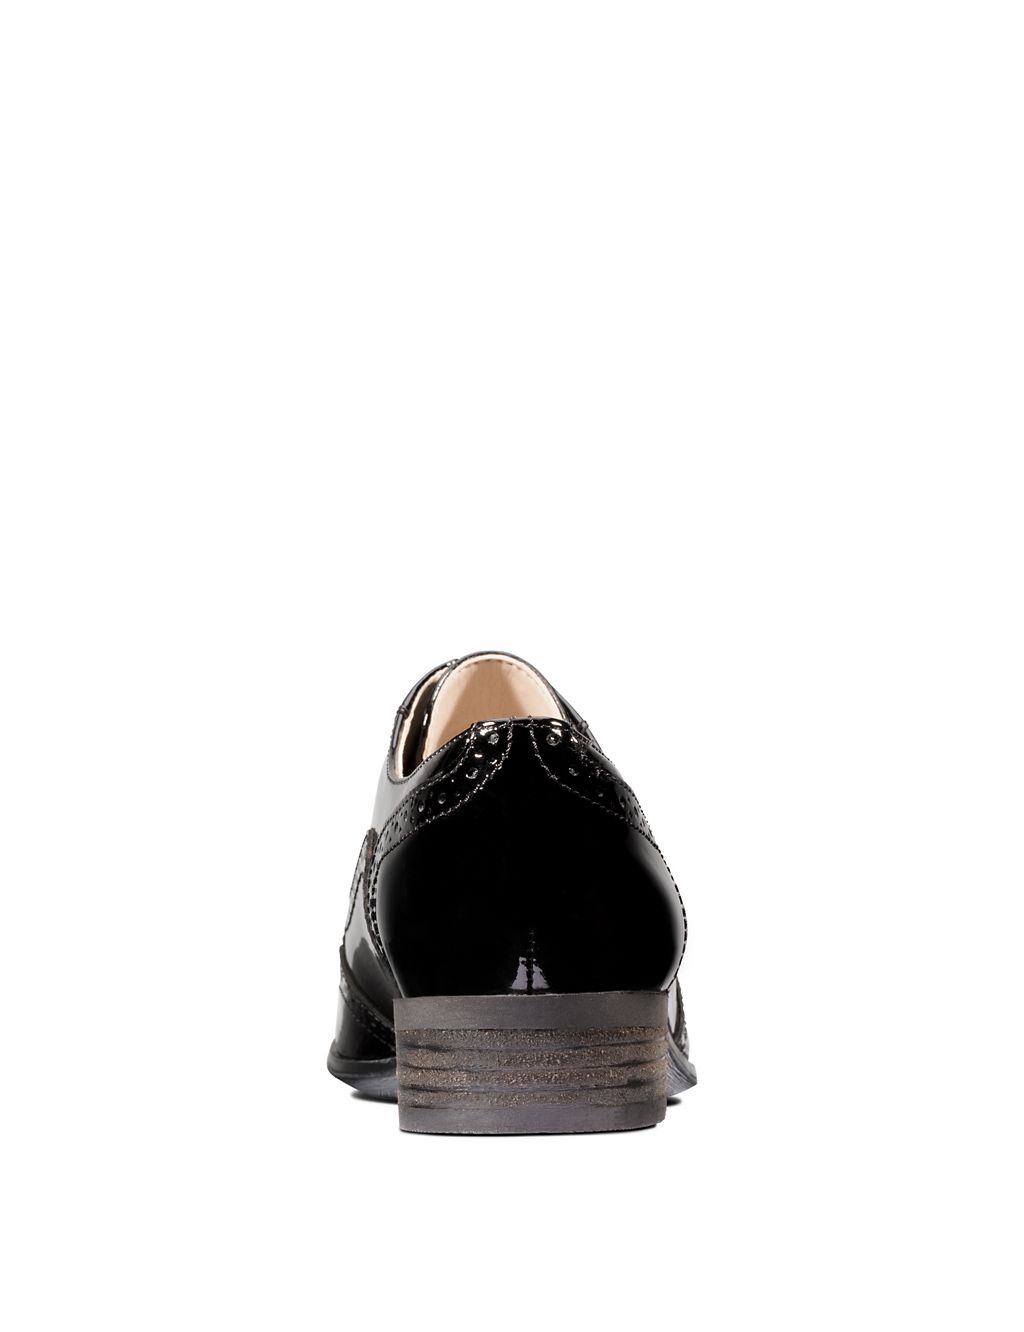 Wide Fit Leather Patent Brogues 4 of 7